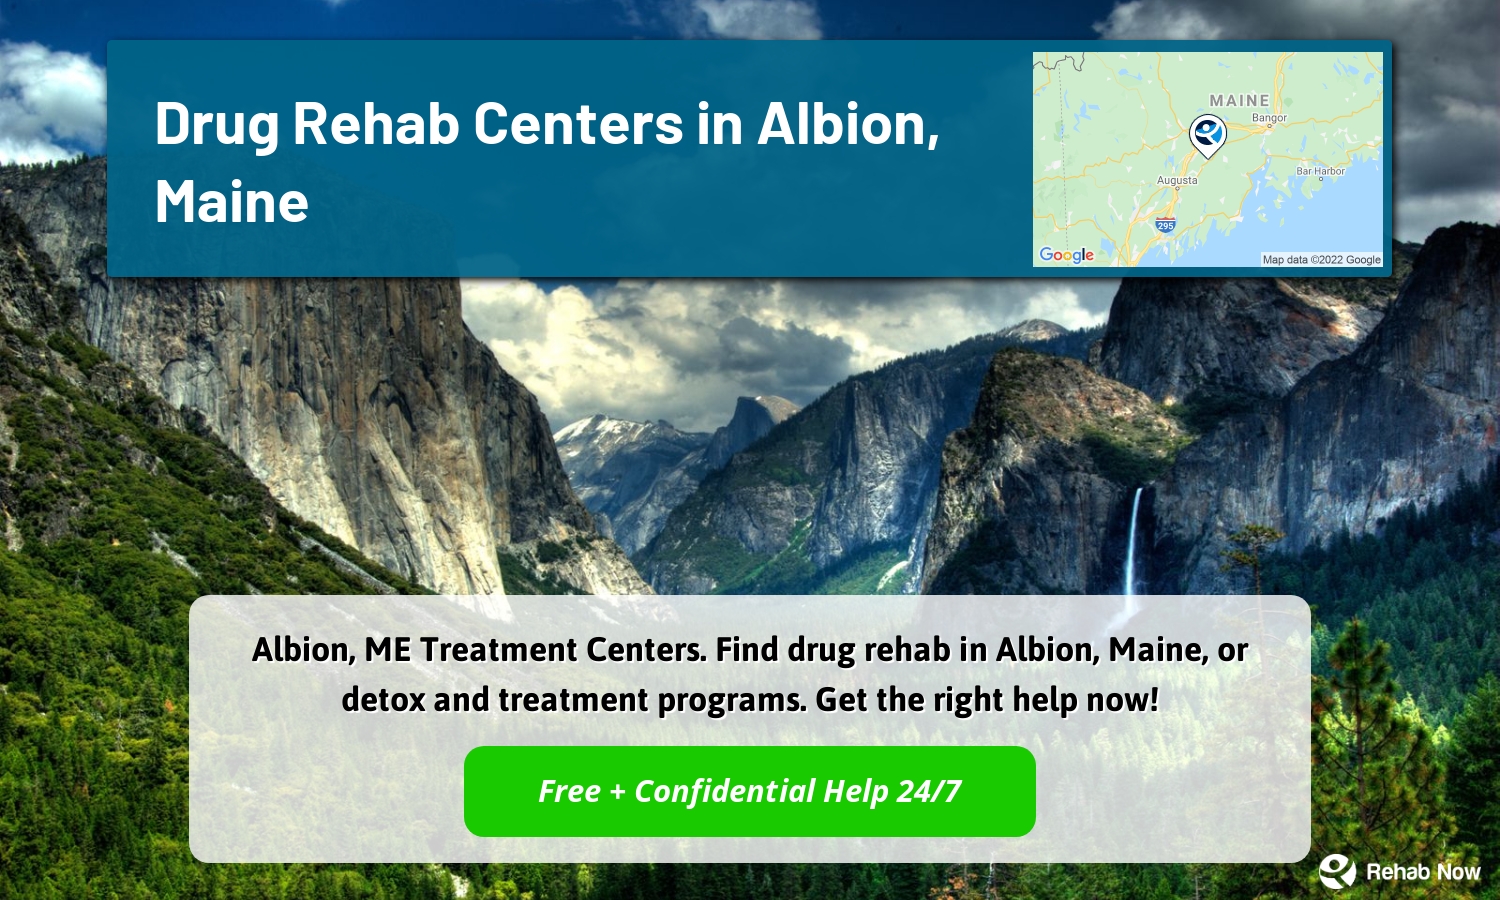 Albion, ME Treatment Centers. Find drug rehab in Albion, Maine, or detox and treatment programs. Get the right help now!